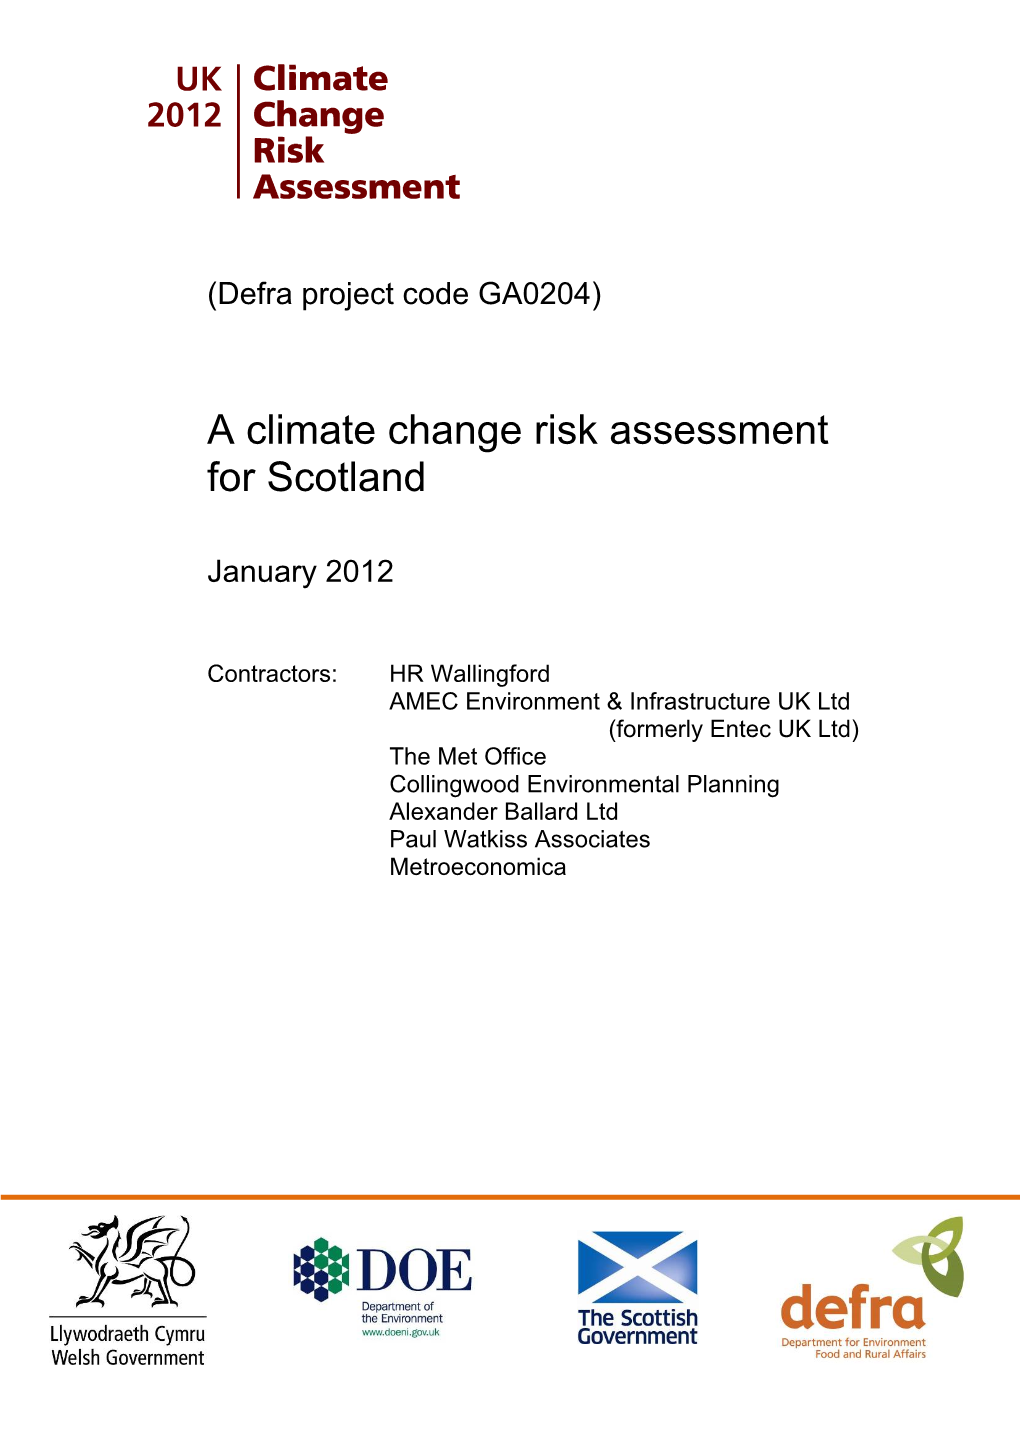 A Climate Change Risk Assessment for Scotland